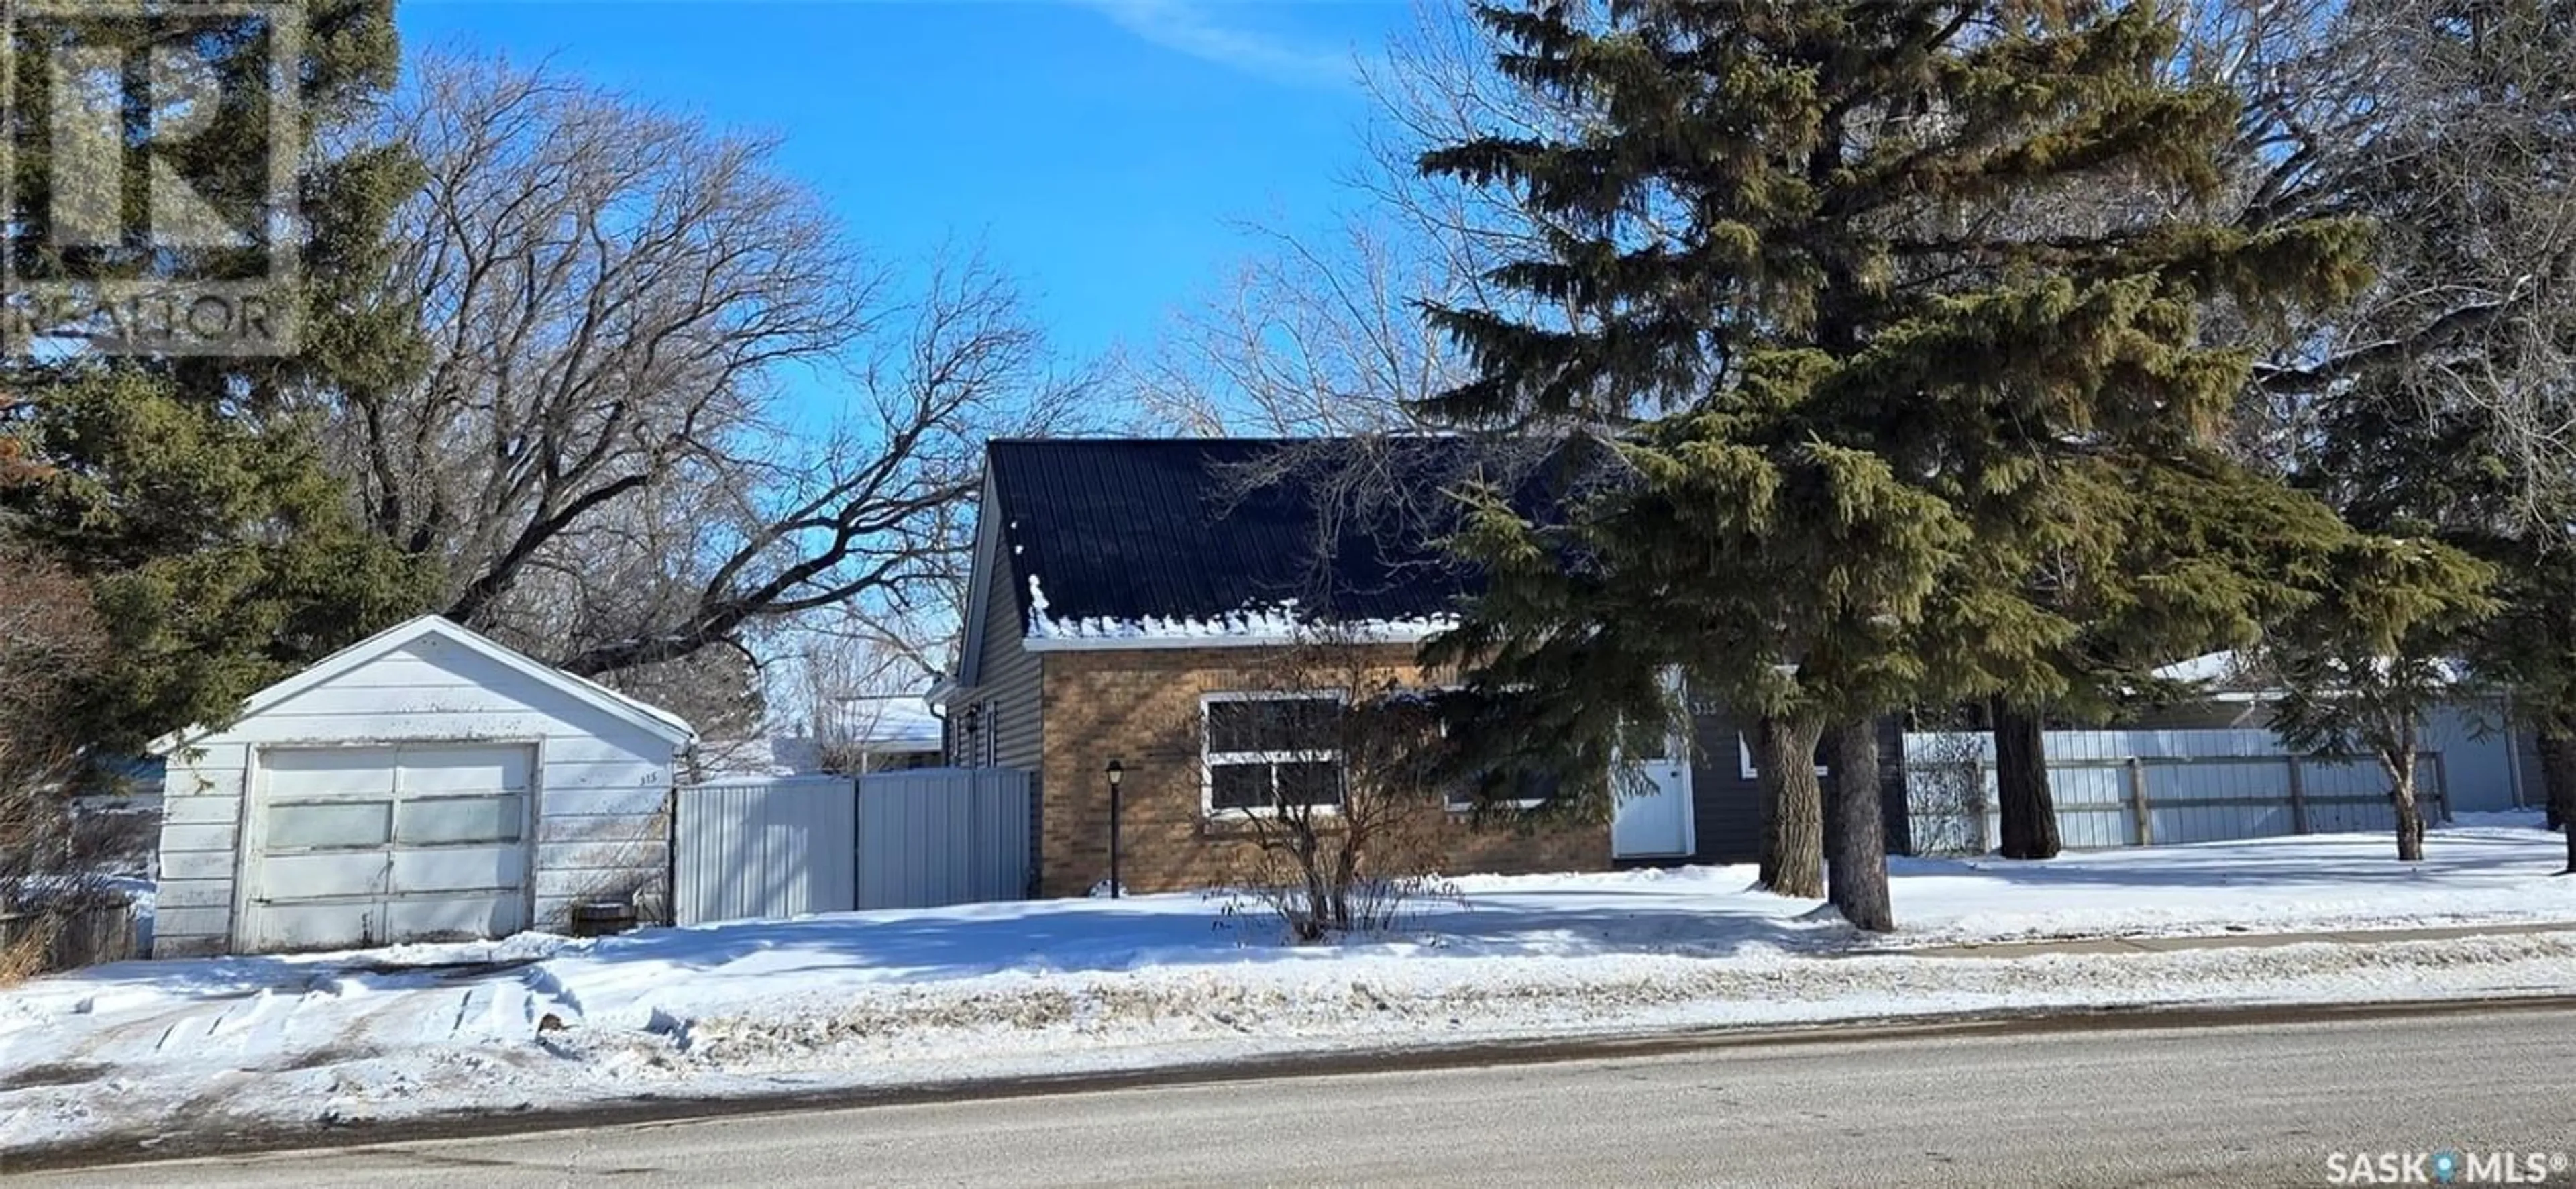 Home with unknown exterior material for 315 Government ROAD, Stoughton Saskatchewan S0G4T0